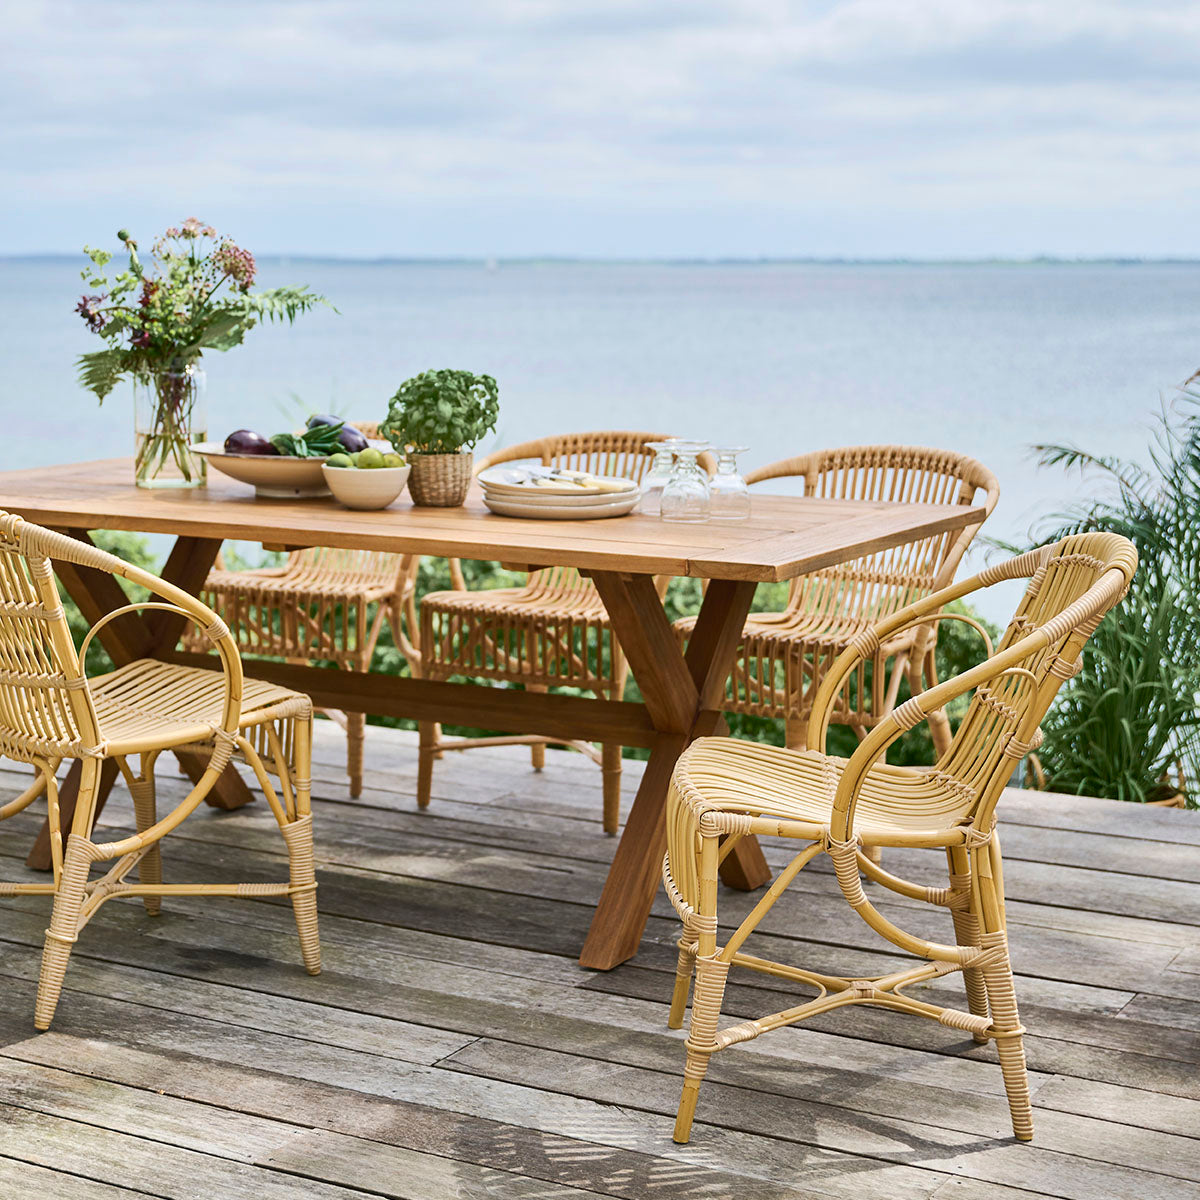 Robert Exterior Dining Chair by Sika